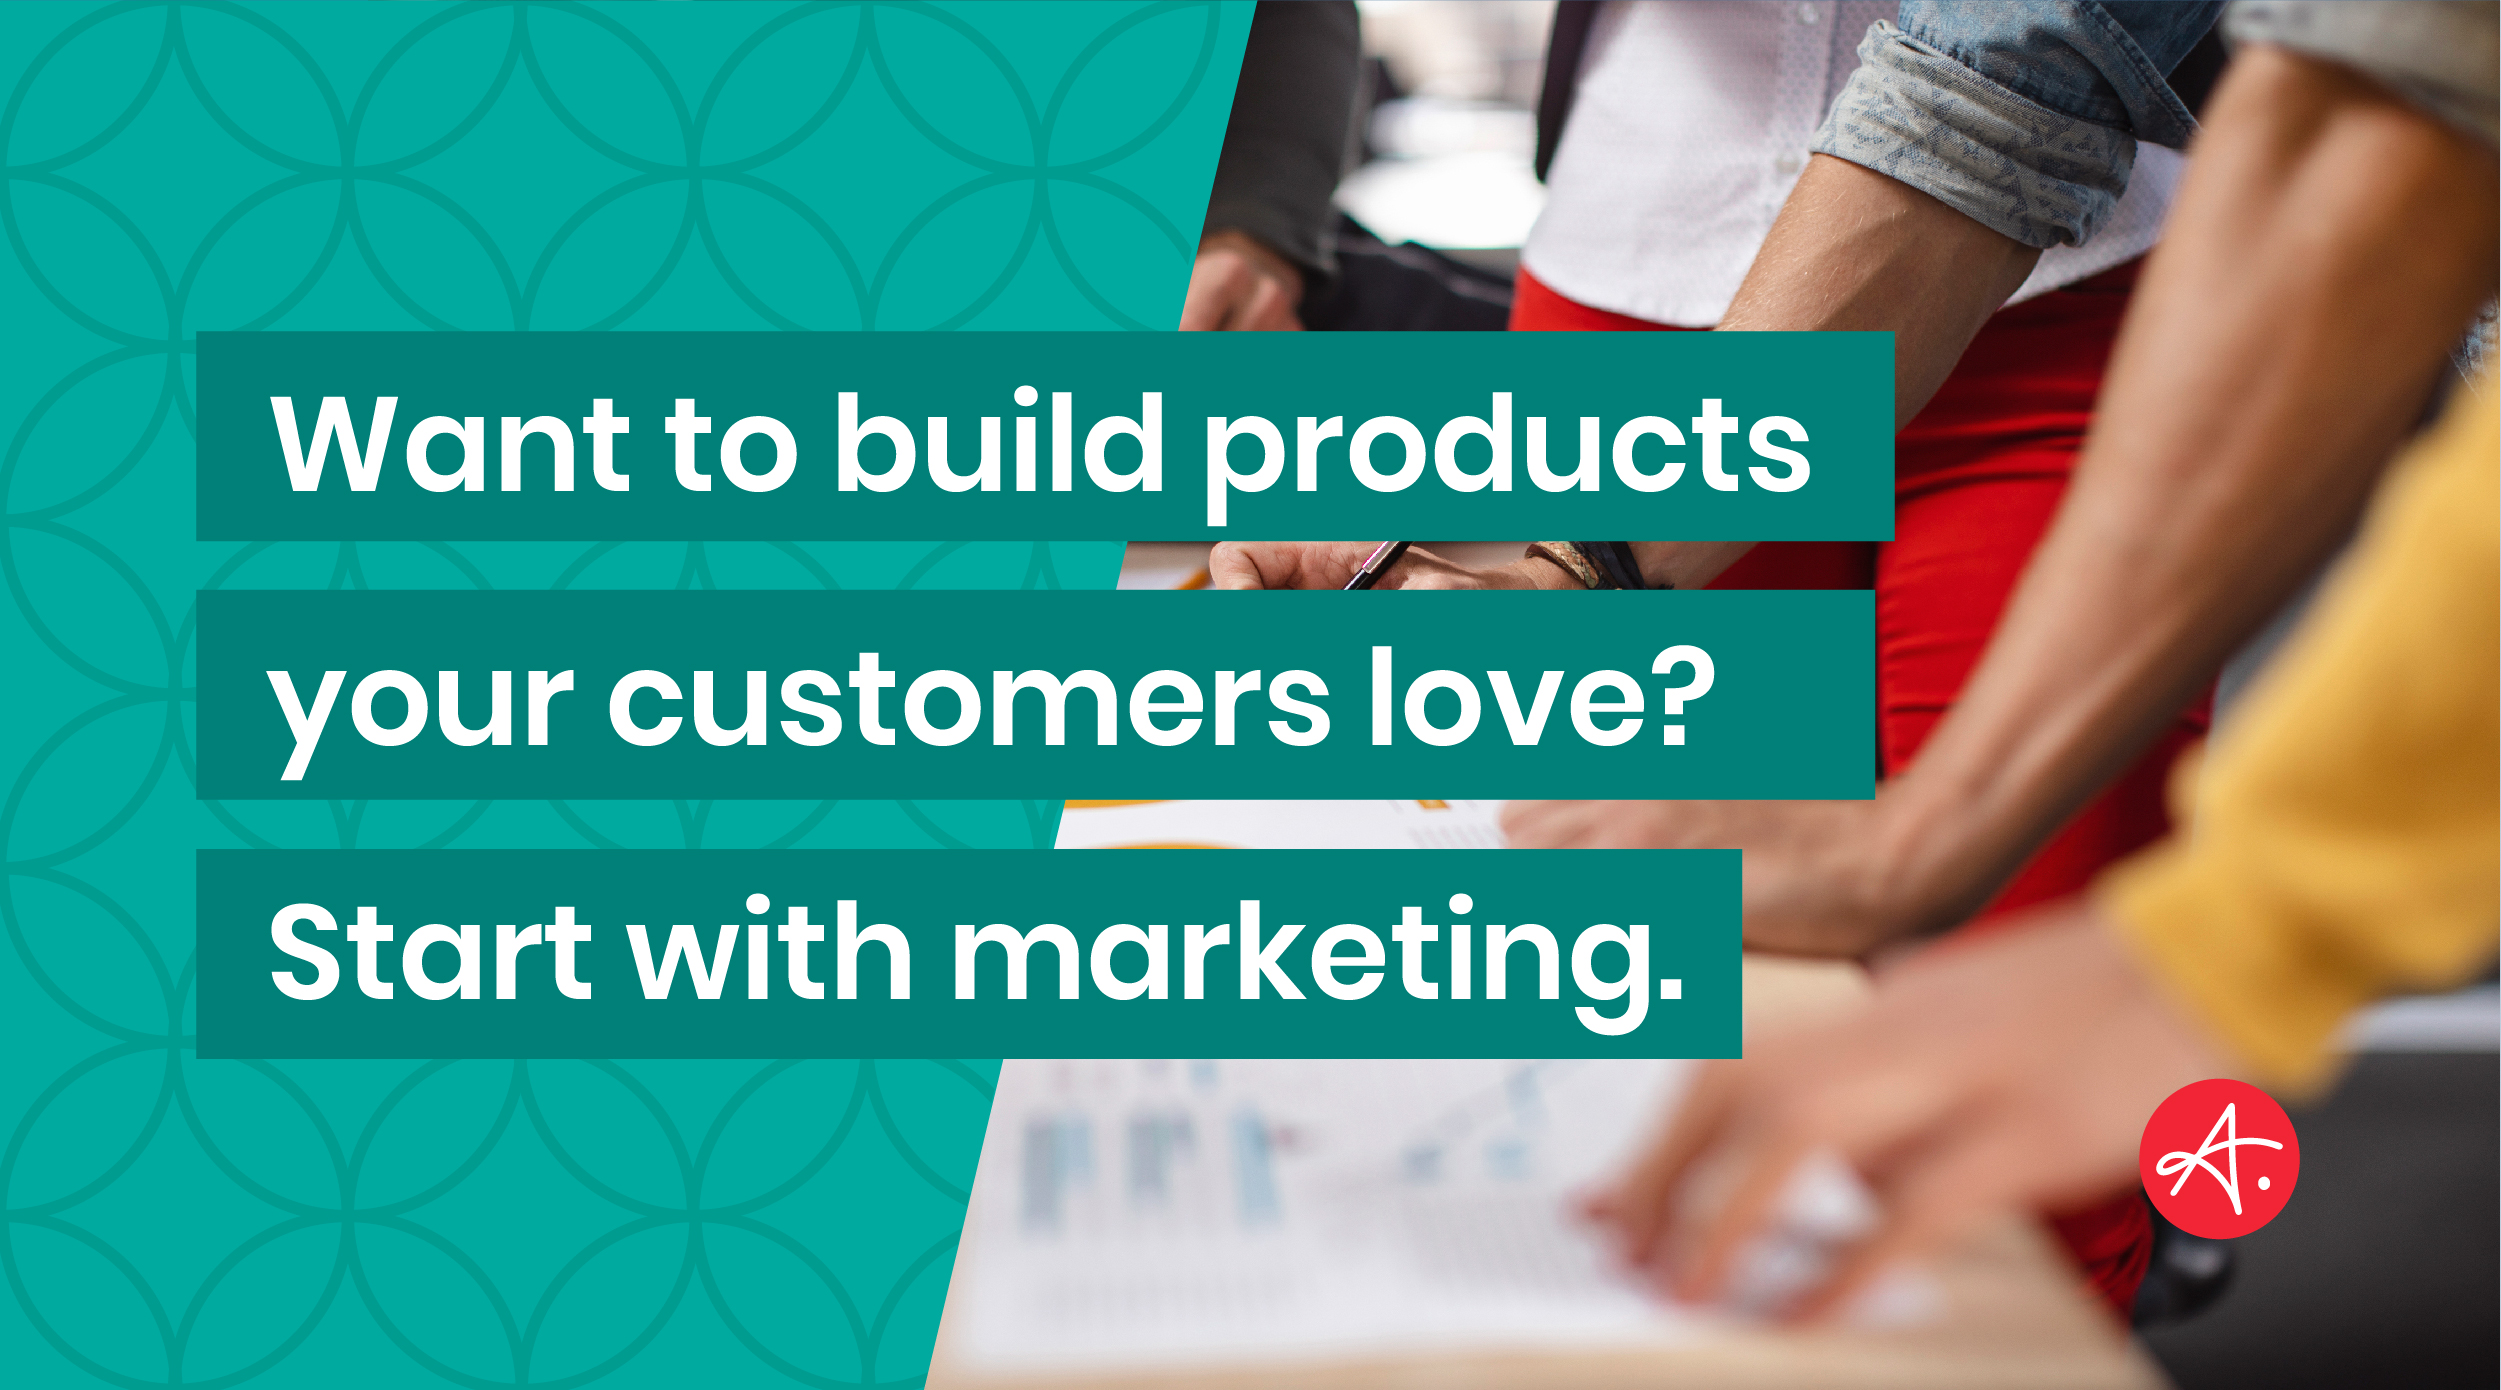 Want to build products your customers love? Start with marketing.